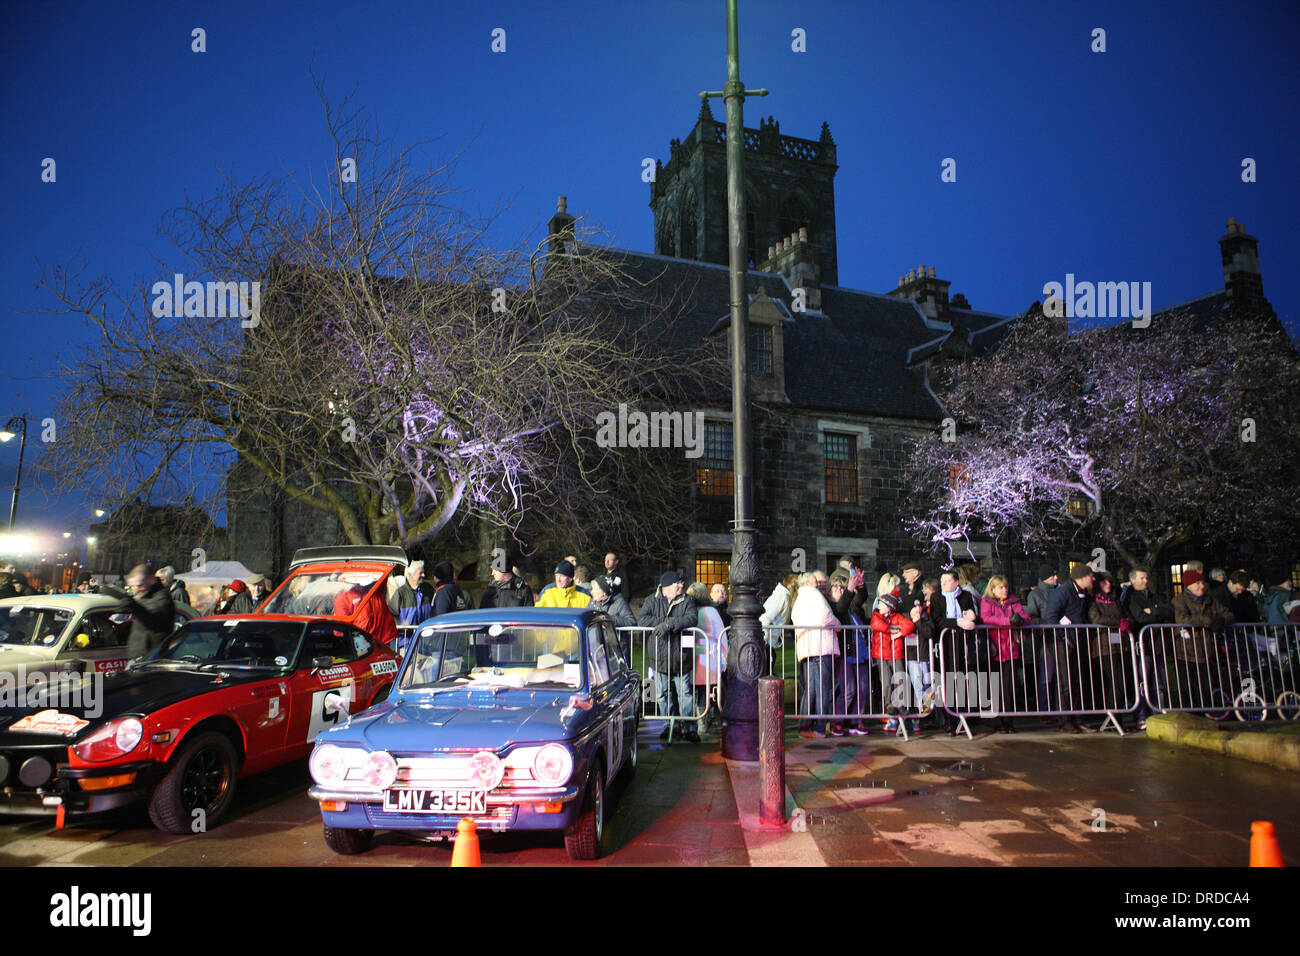 Paisley, Scotland, UK. 23rd January 2014. Final preparations of the classic cars before the UK start of the Rallye Monte-Carlo Historique in front of Paisley Abbey Credit: © PictureScotland/Alamy Live News  Stock Photo